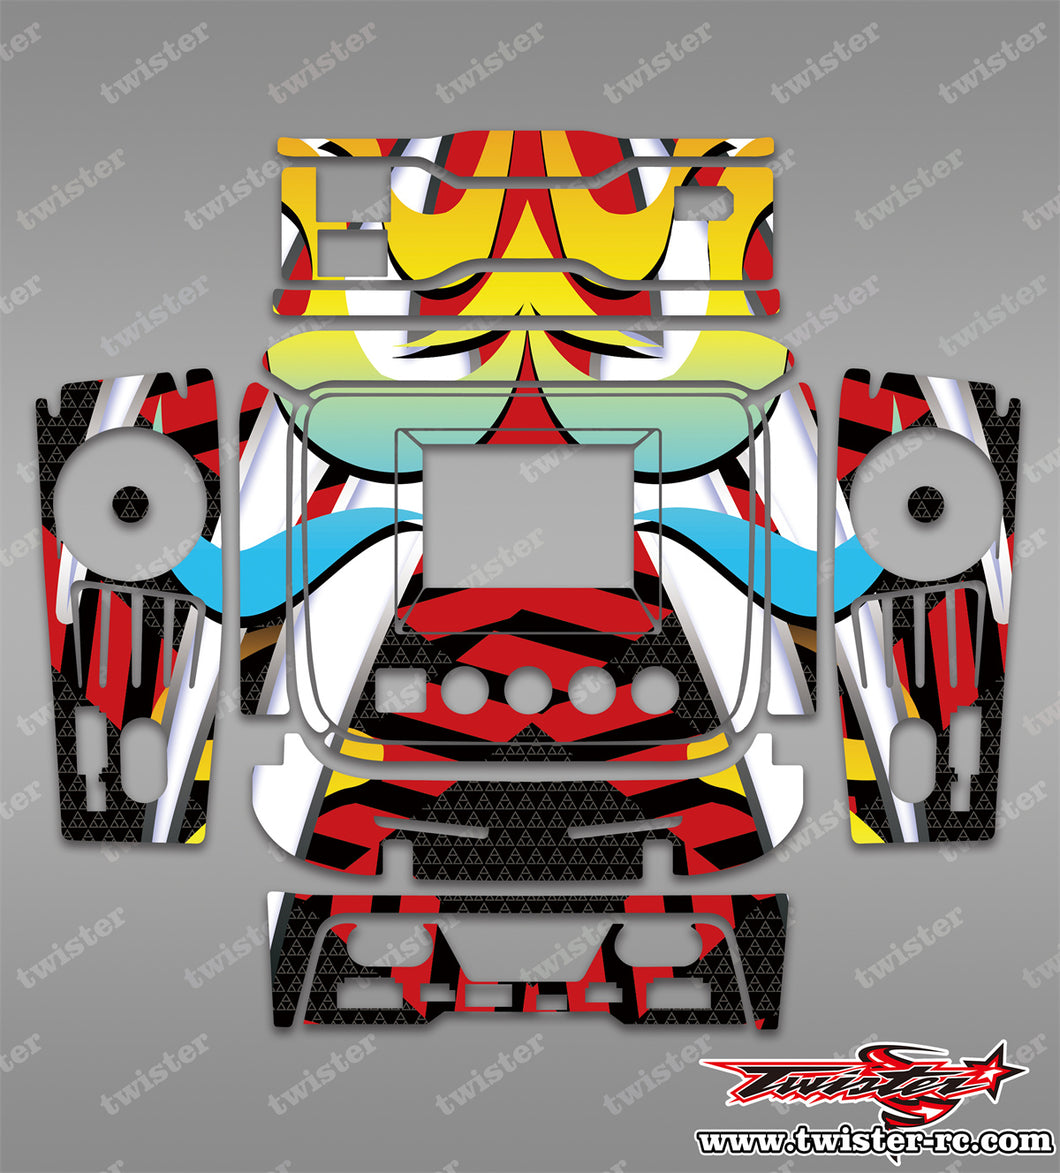 TR-Q200-MA17 Sky RC Q200 Charger Metallic/Optical White Pattern Wrap ( Type A17 )4 Colors